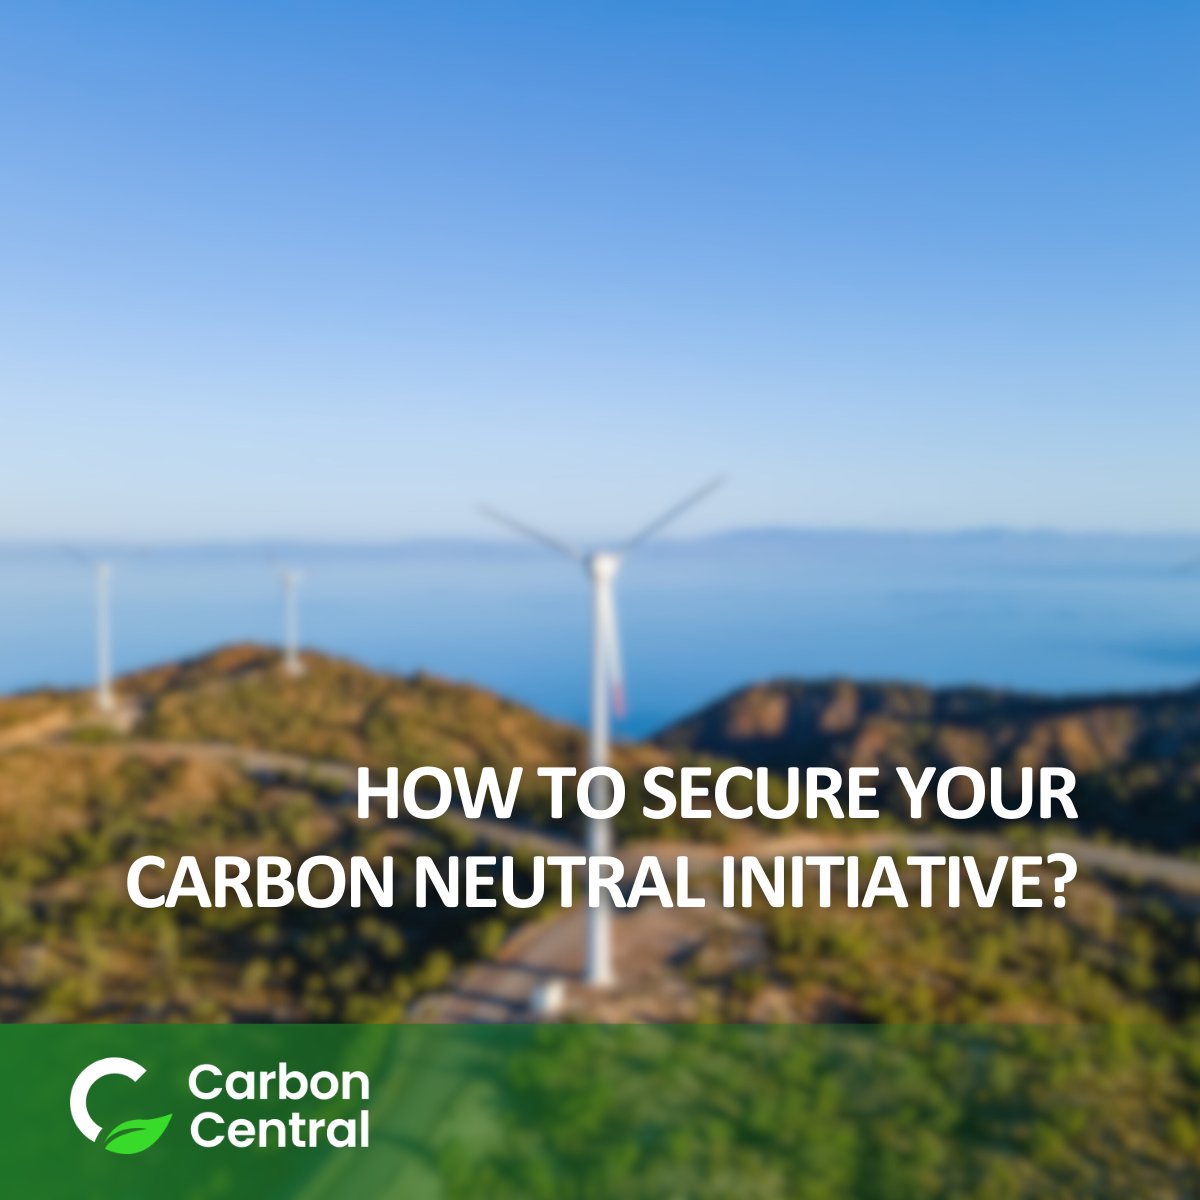 #CarbonCentral provides organisations with the tools they need to monitor, report, and optimise their #CarbonNeutral initiatives, driving progress towards a greener planet: tymlez.com/contact
#ClimateAction
#GreenEconomy #CorporateSustainability #TYMLEZ  $NVQ